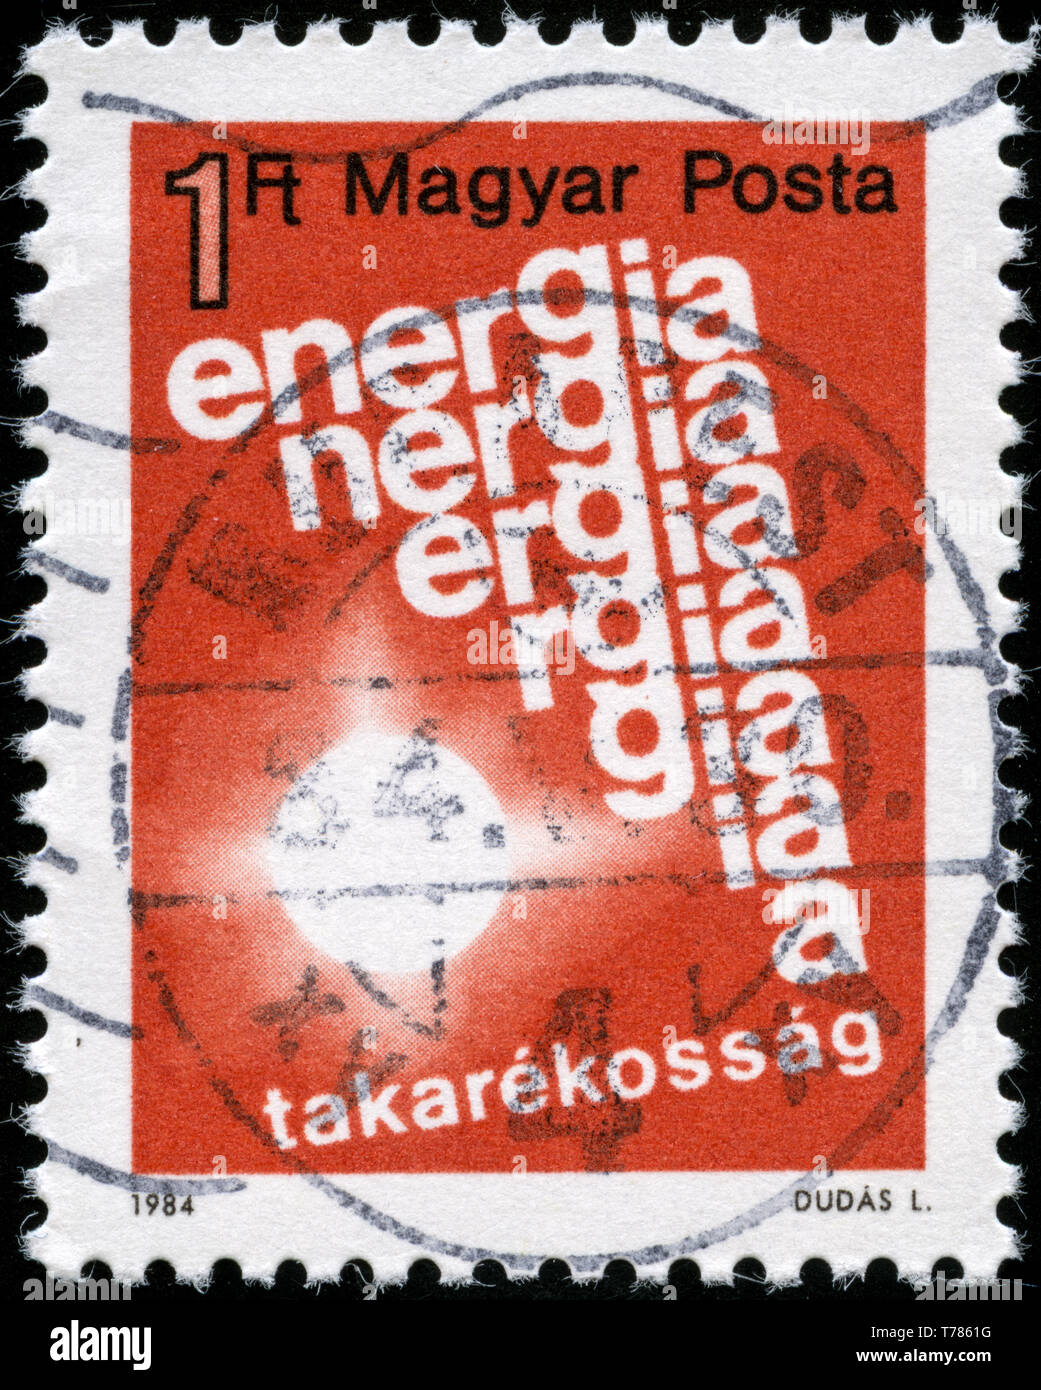 Postage stamp from Hungary in the Energy Conservation series issued in 1984 Stock Photo